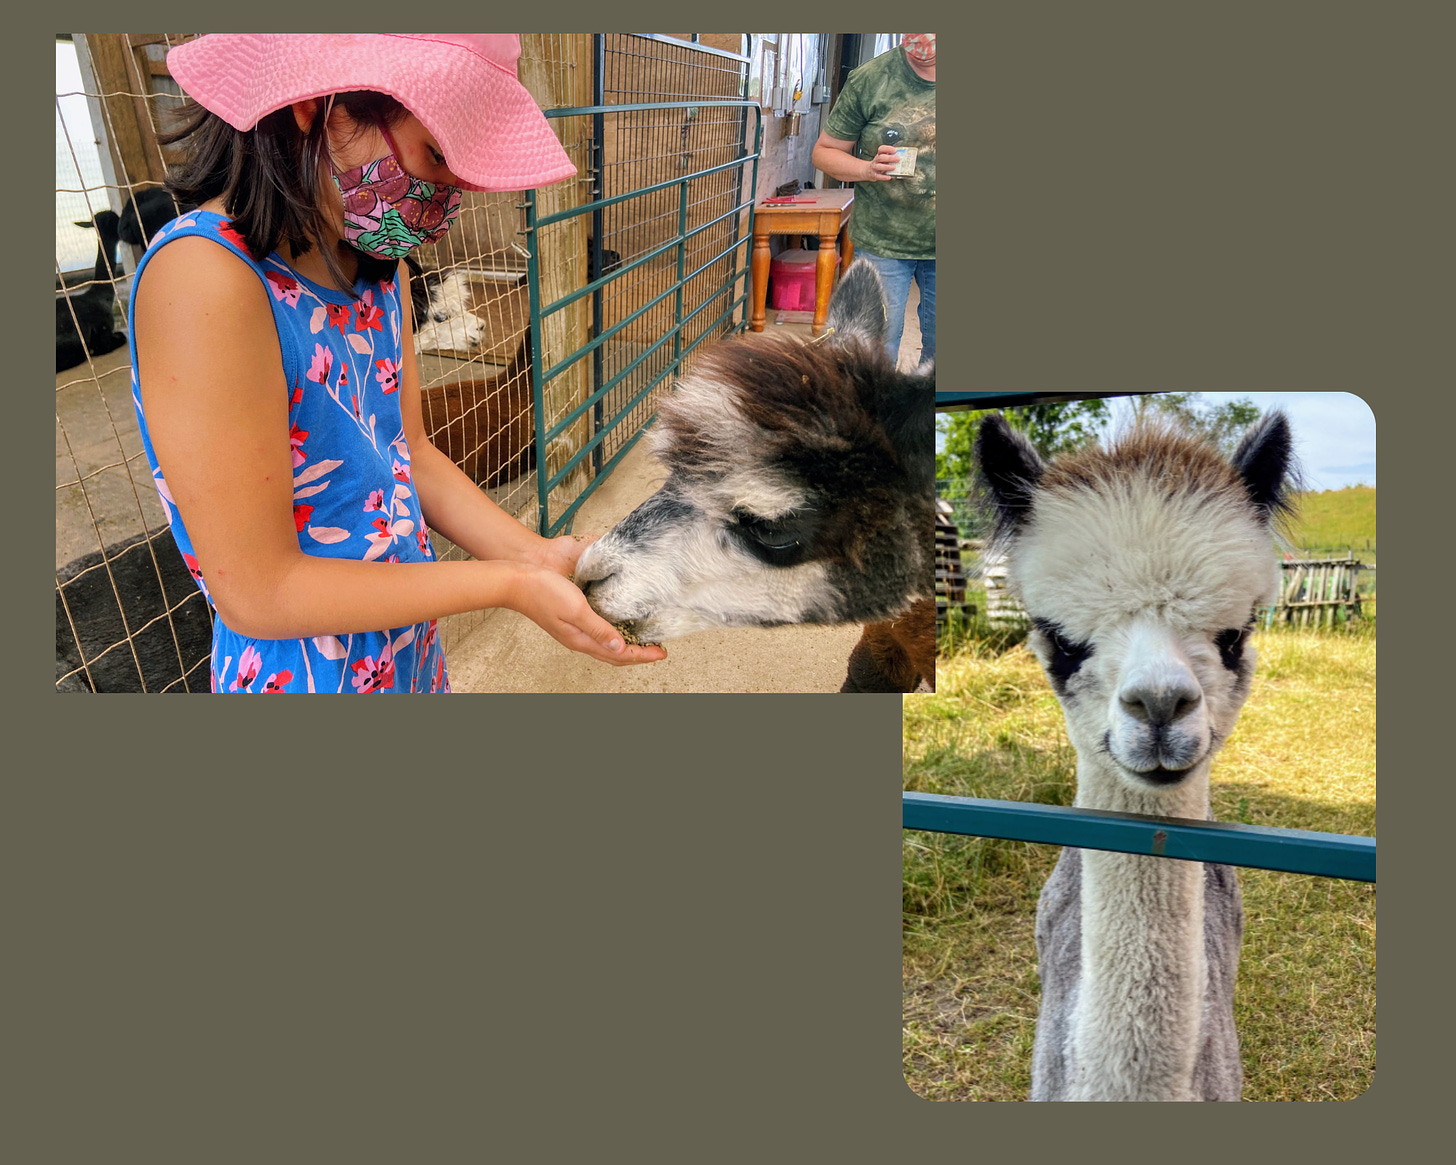 girl feeding alpaca from palm in photo 1; alpaca looking at camera in photo 2